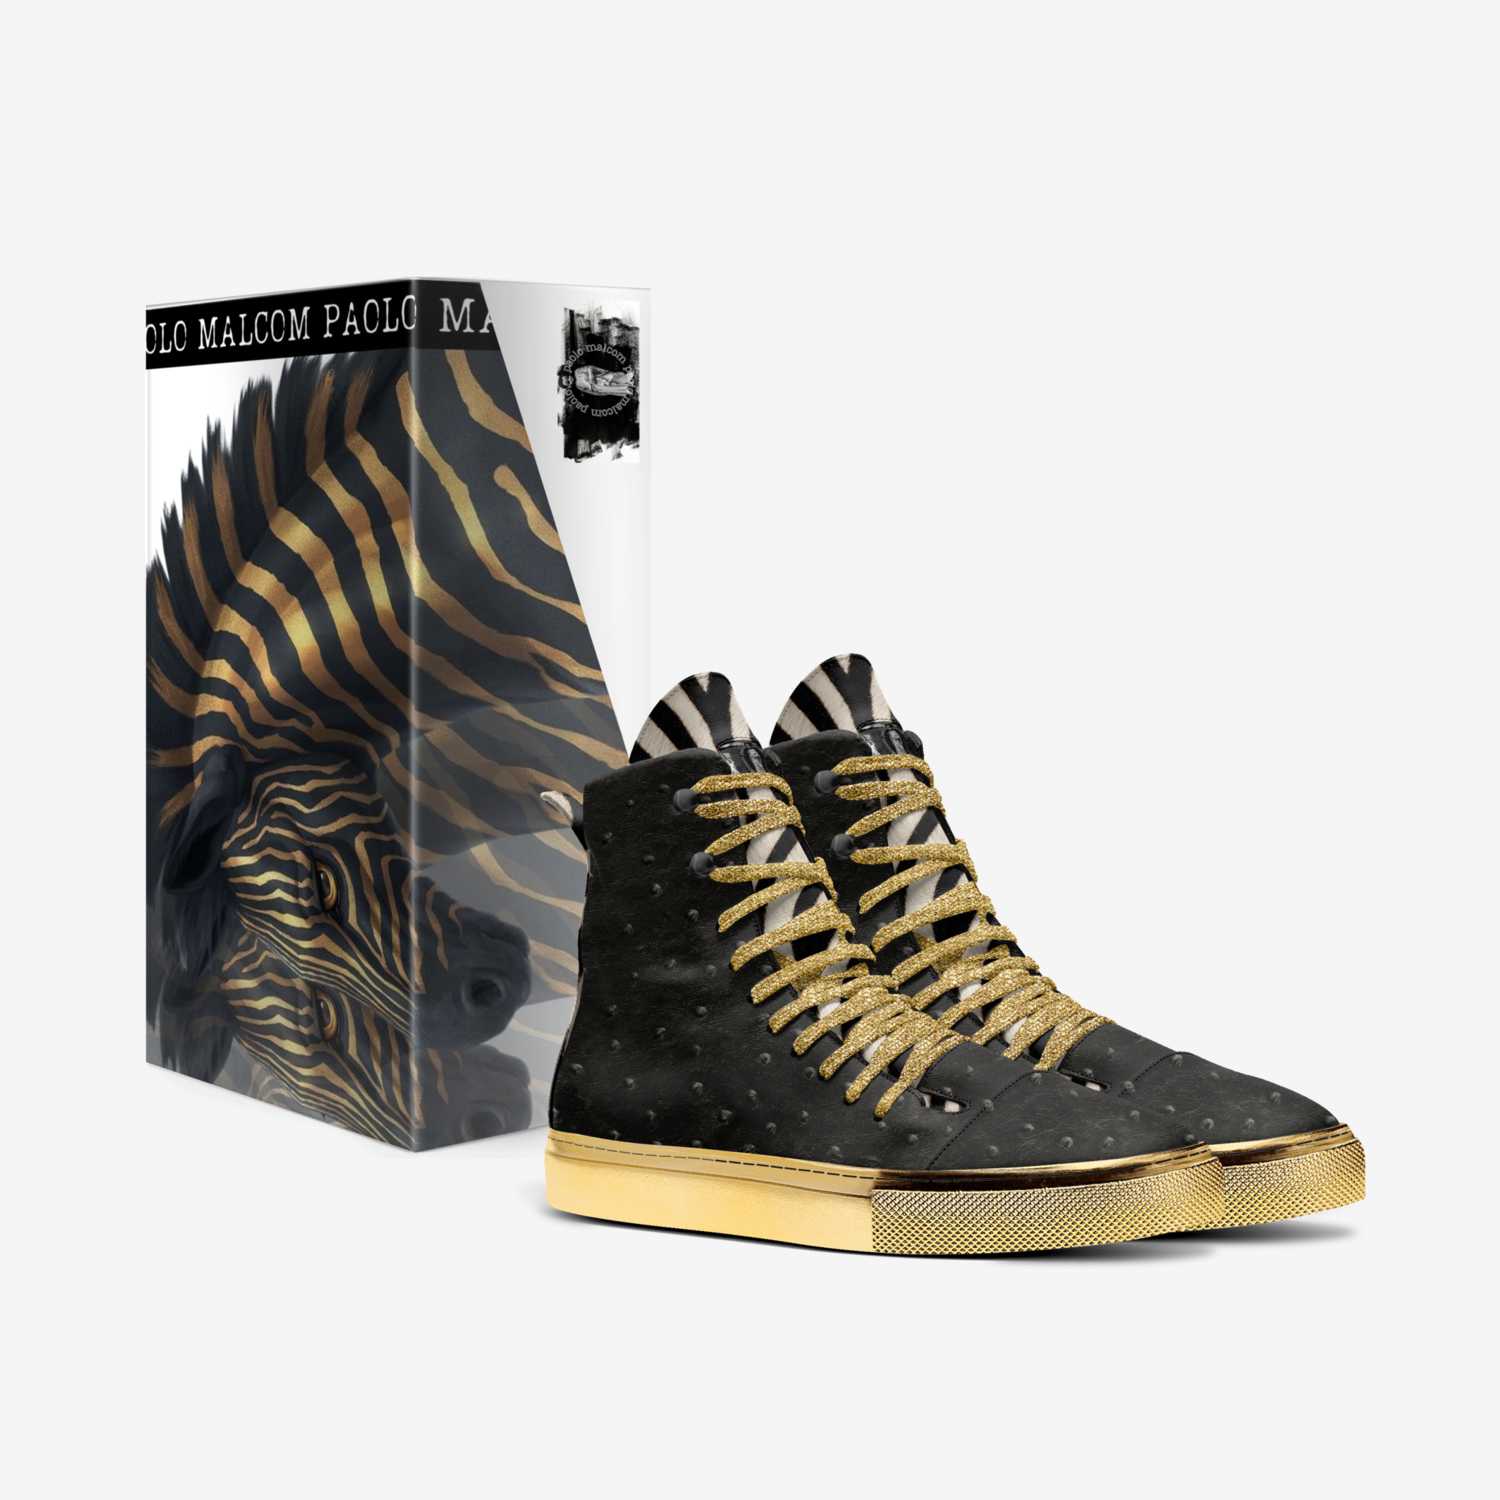 Zebra D'oro custom made in Italy shoes by Paolo Malcom | Box view